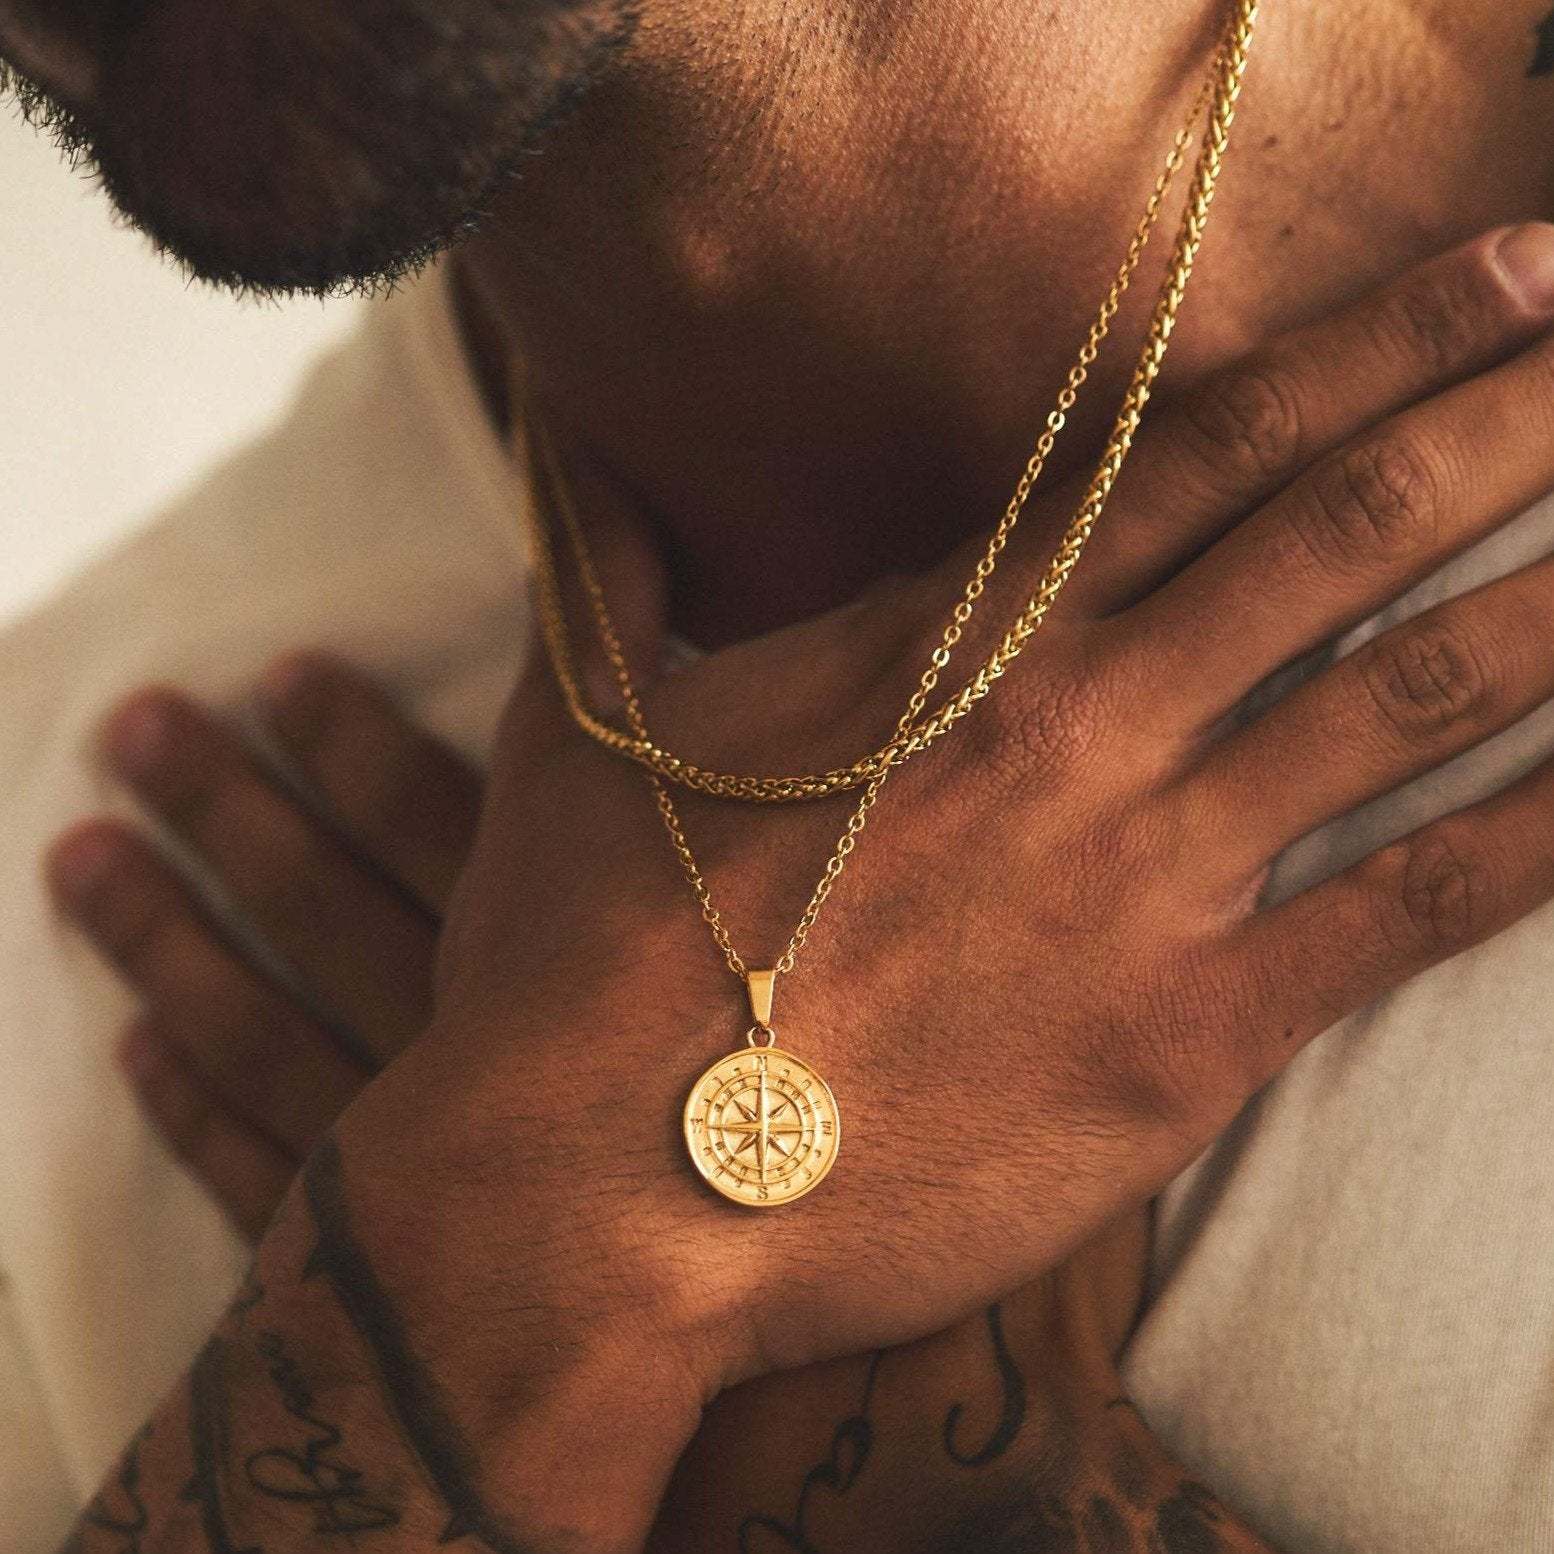 Layered Necklaces for Men, Sailing Travel Compass Pendant Gold Wheat Men's Necklace